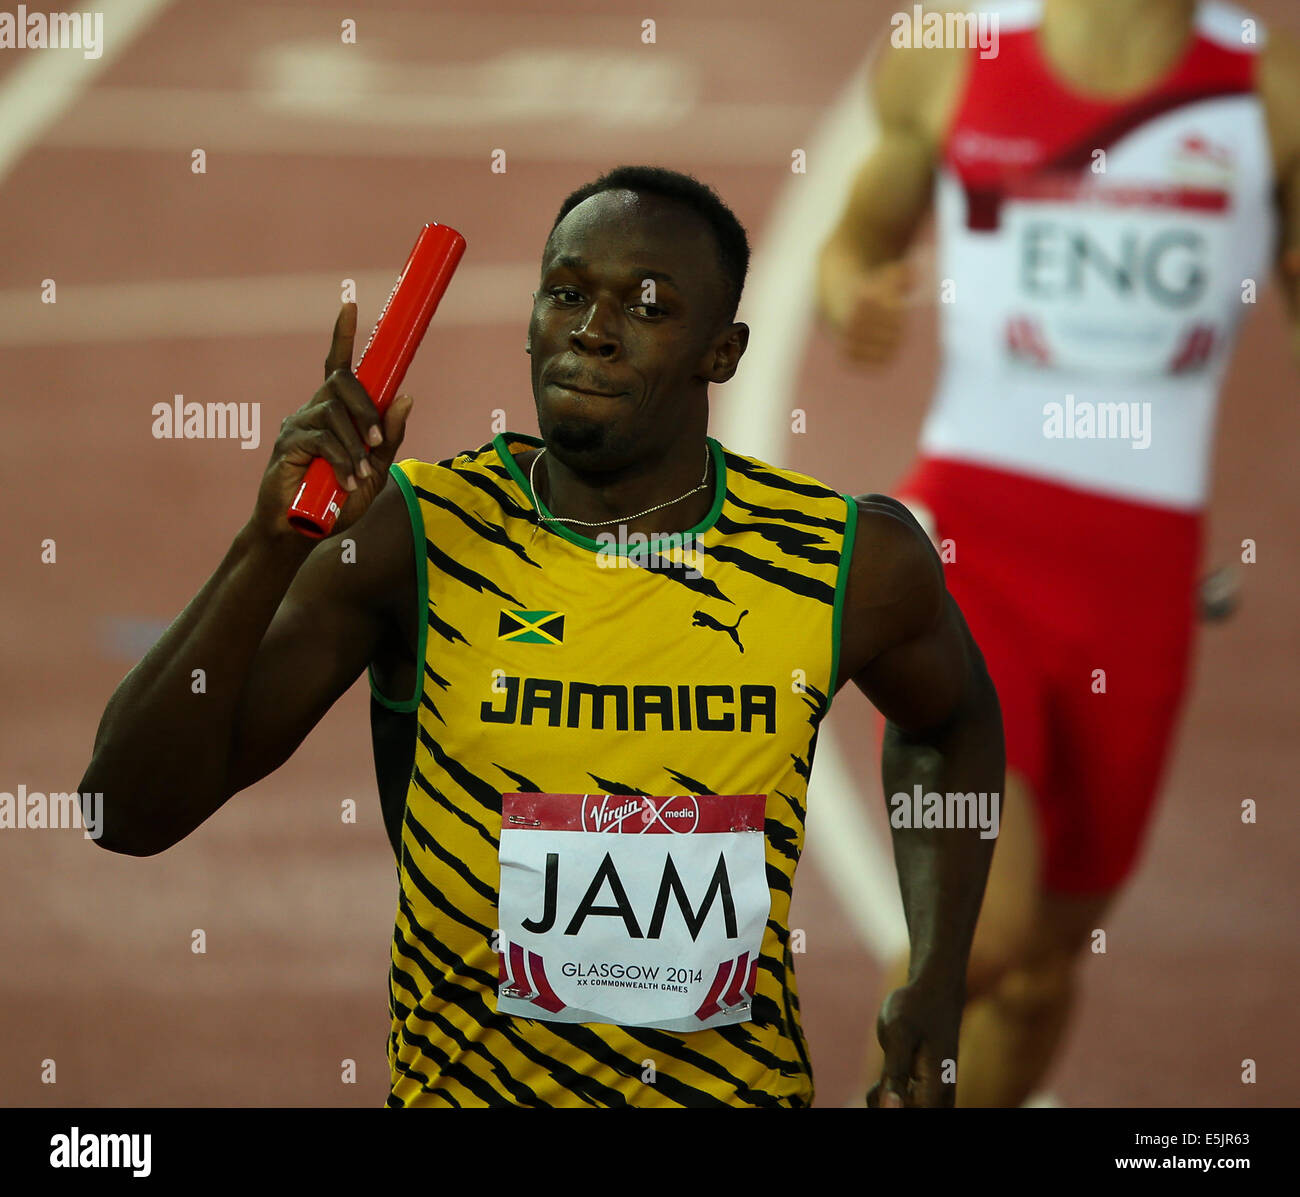 Hampden Park Glasgow 2 August 2014. Commonwealth Games Men's 4x100 final.  Usain Bolt brings home the baton for Jamaica in a new Games record time of 37.58.  England finished second in 38.02. Jamaican team - Jason Livermore; Kemar Bailey-Cole; Nickel Ashmeade and Usain Bolt. Danny Talbot ENG follows behind in second Stock Photo